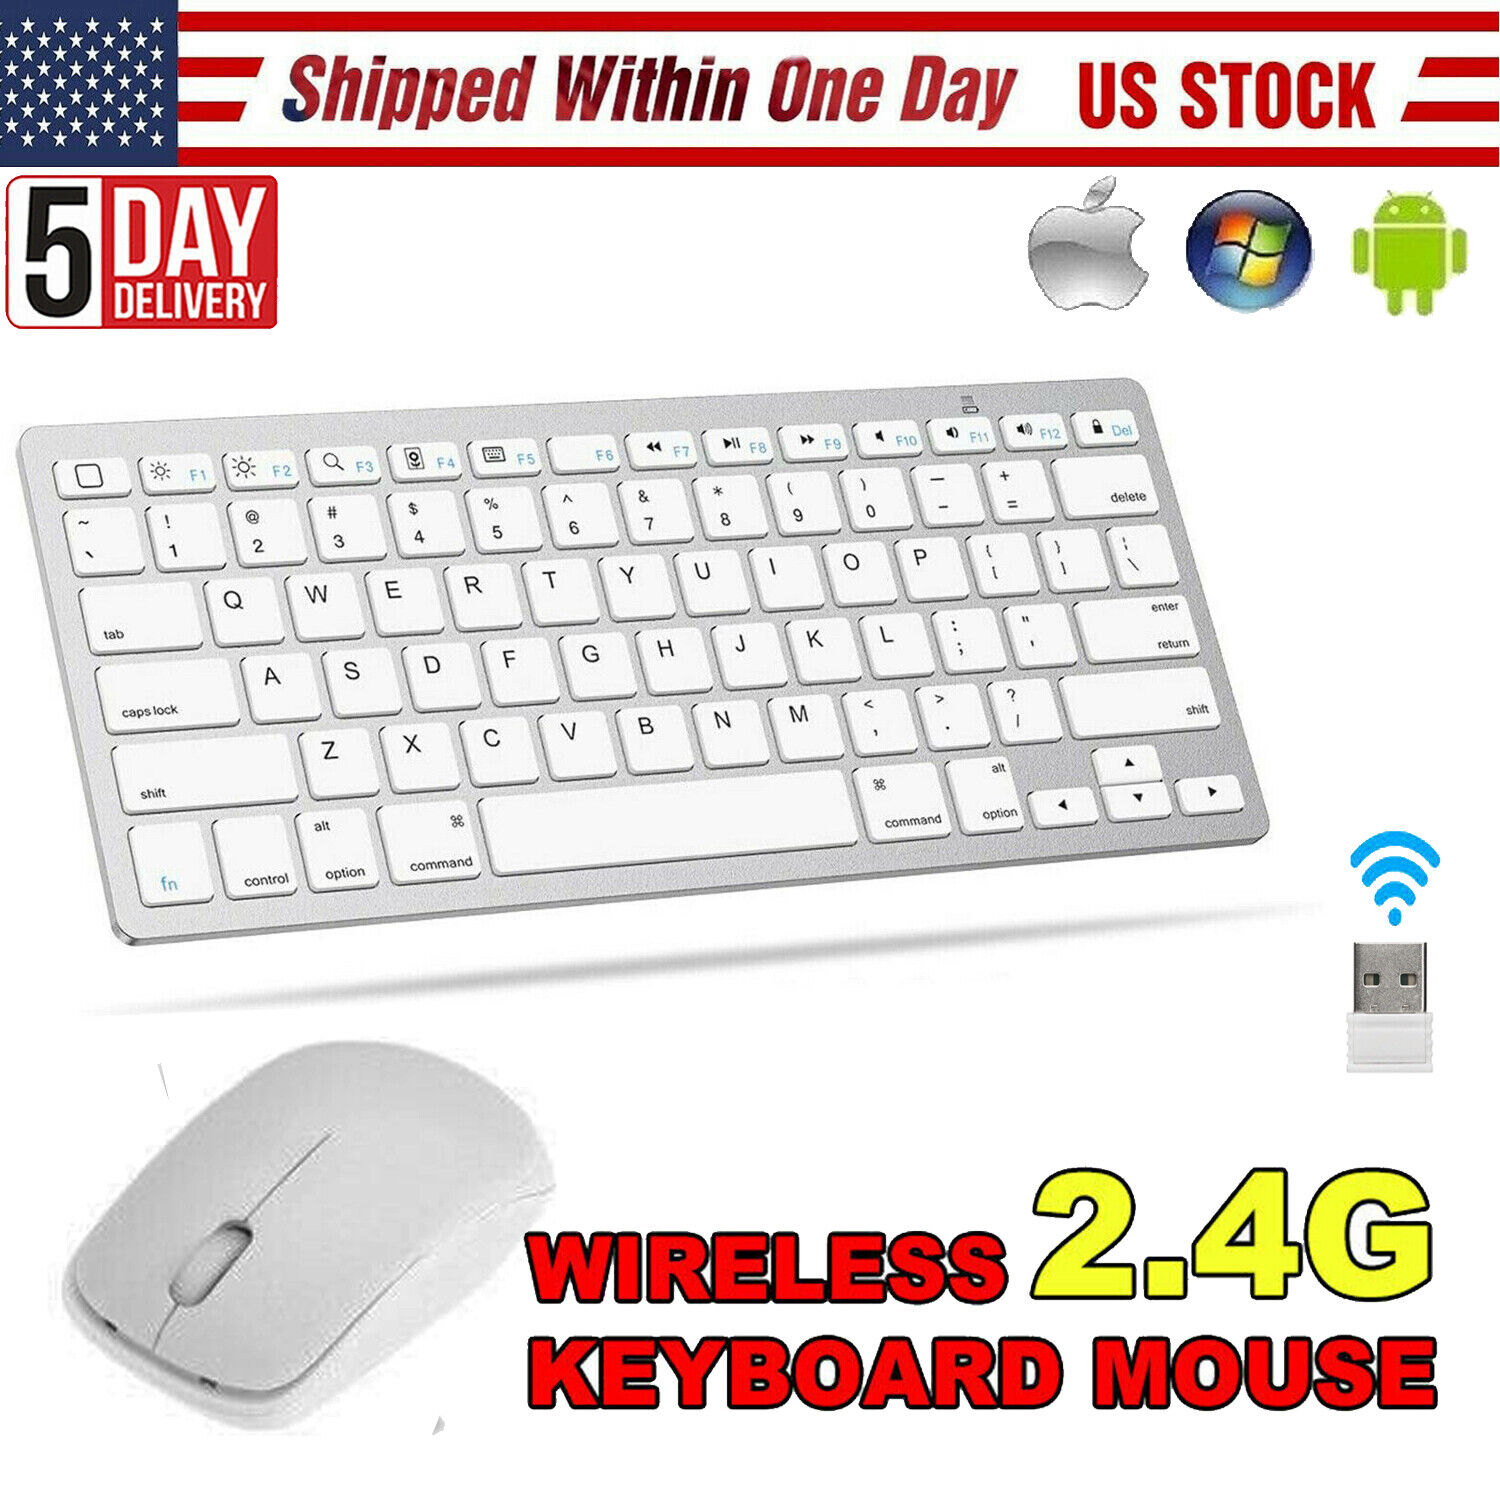 2.4GHZ USB Wireless Slim Keyboard For PC Laptop and Cordless Mouse Combo Kit Set